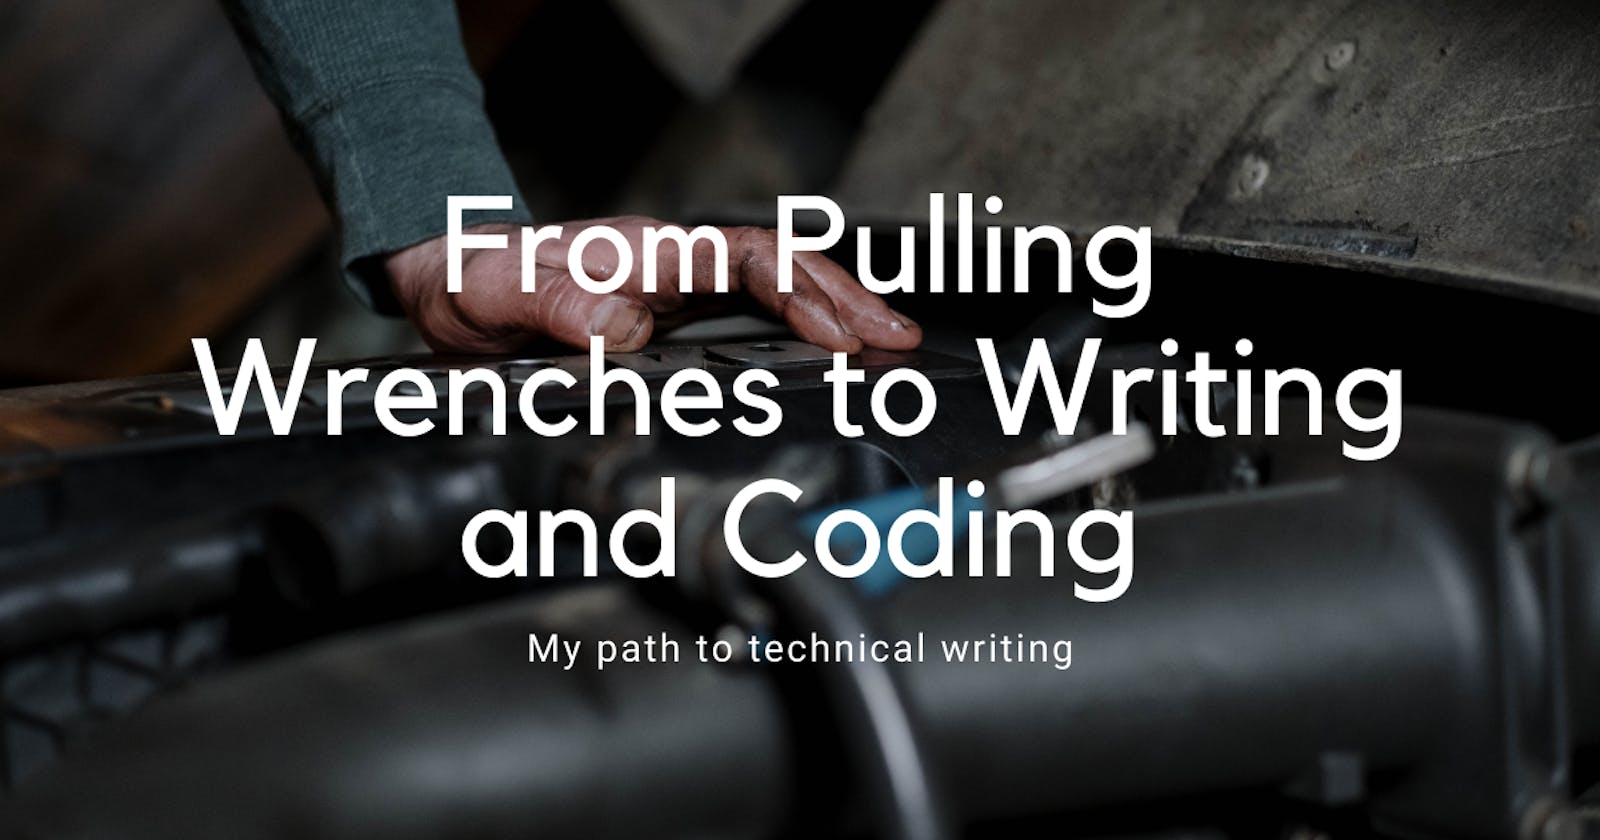 From Pulling Wrenches to Writing and Coding